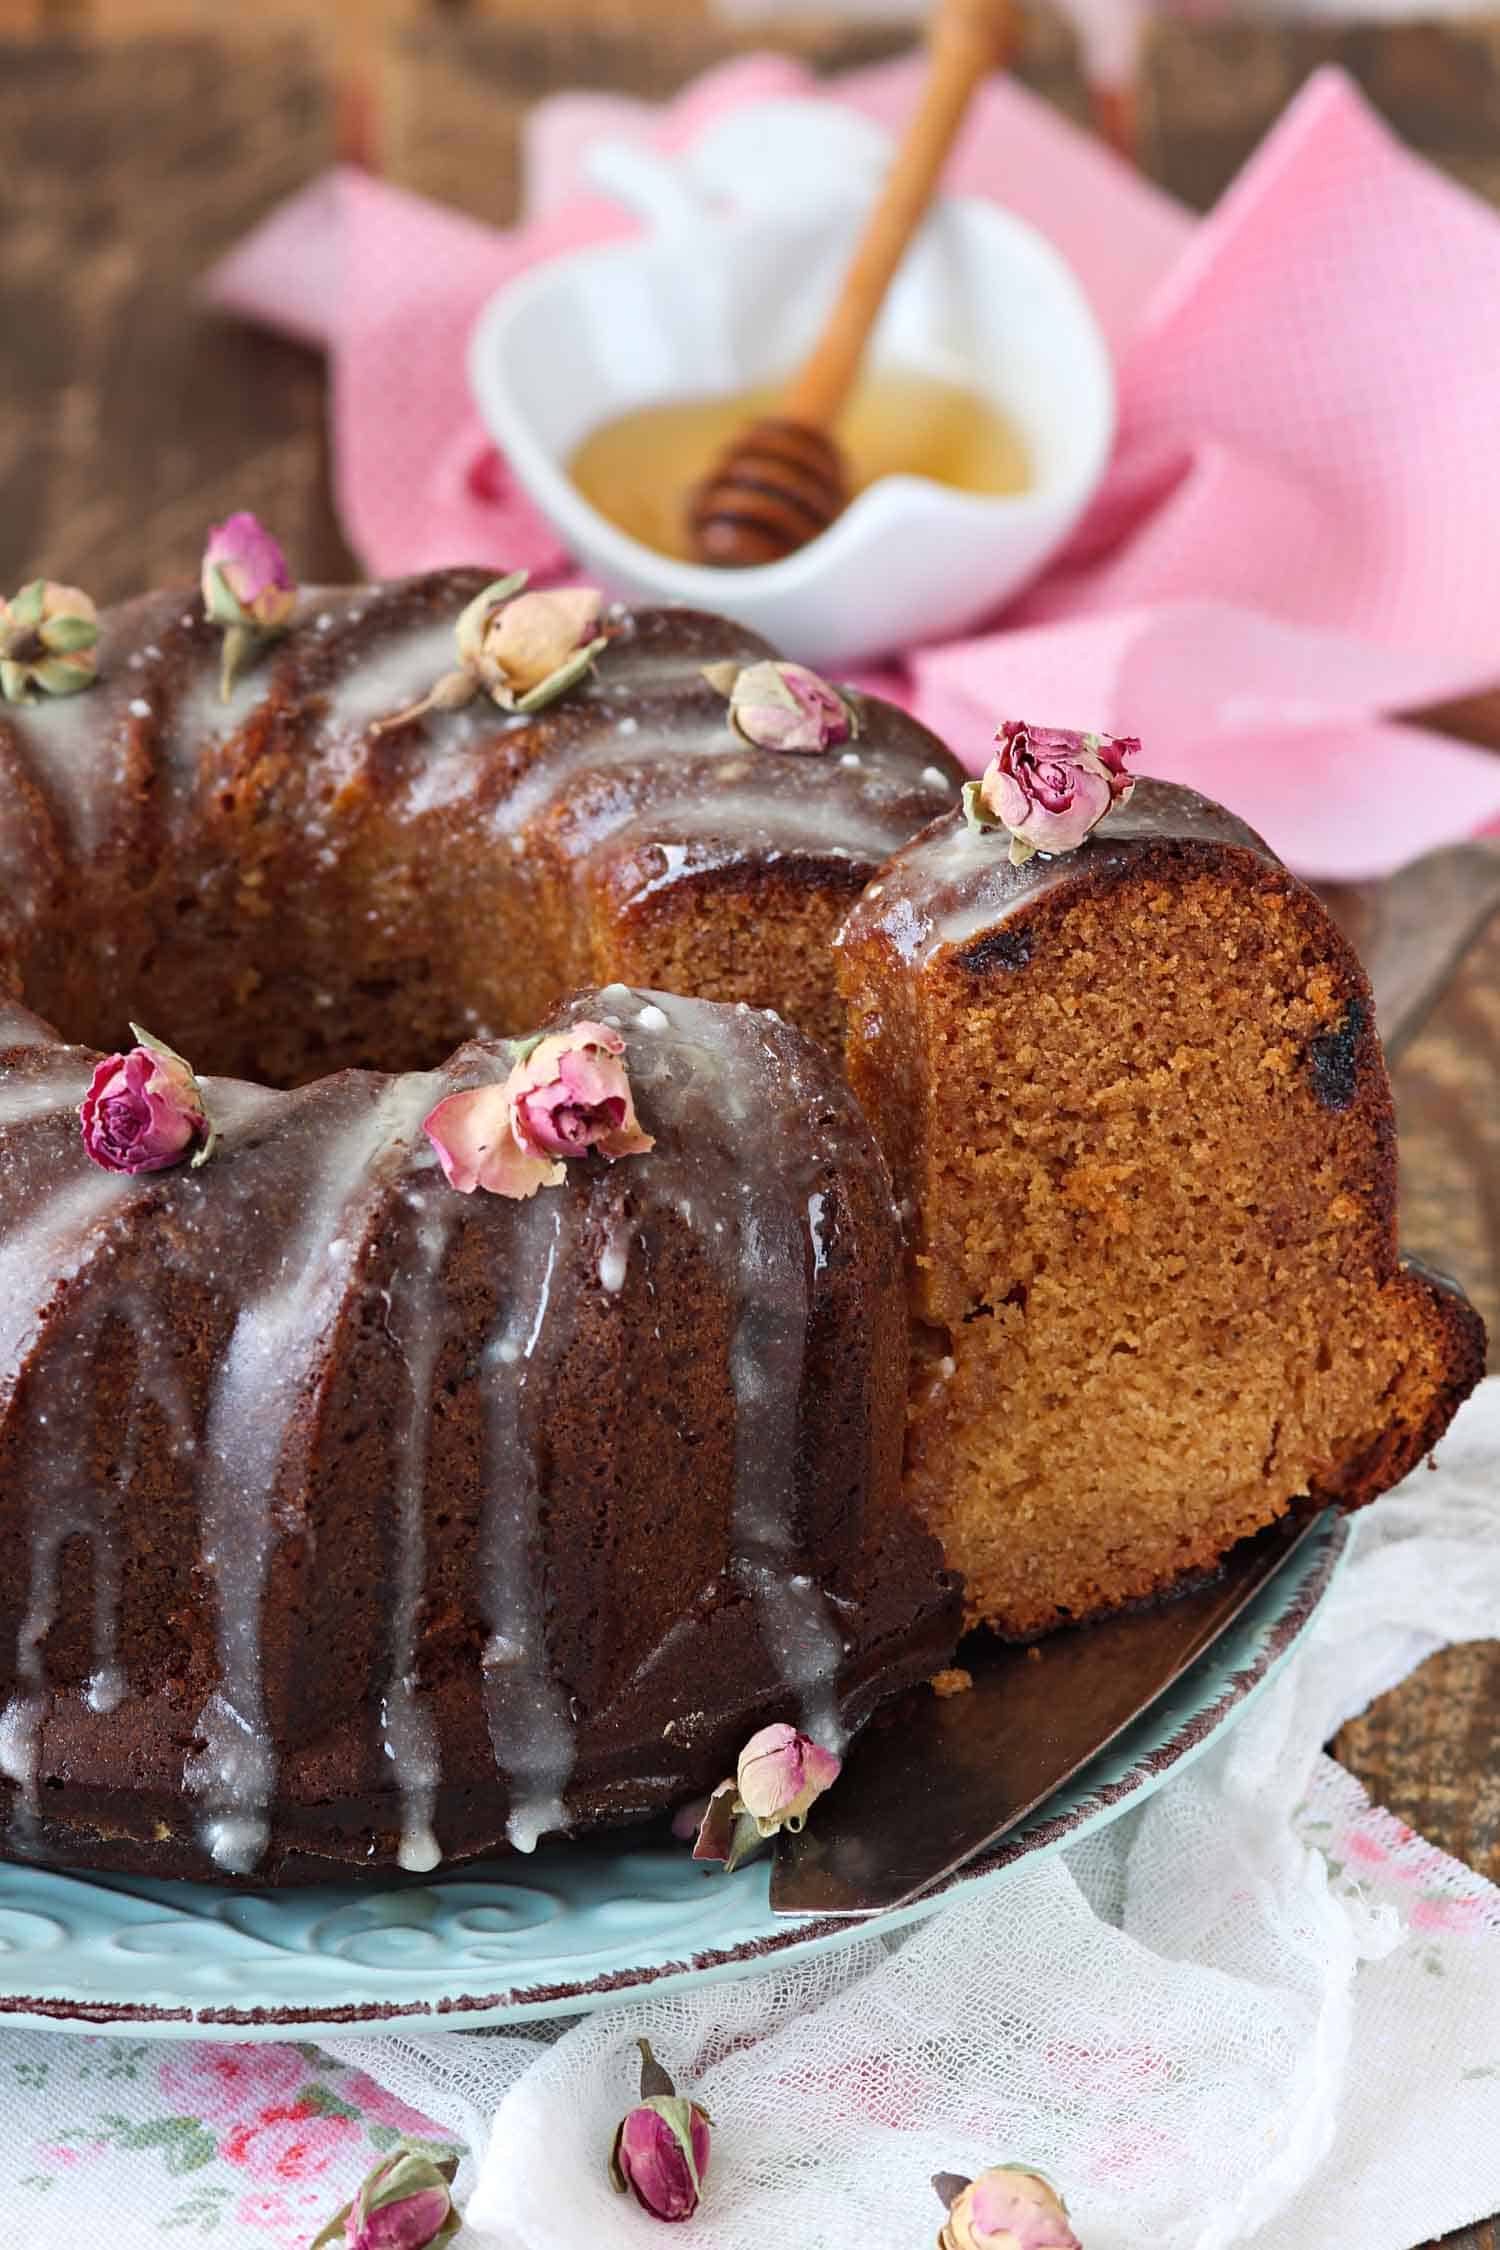 Honey cake, a traditional Rosh Hashanah food, drizzled in honey with a slice cut out.